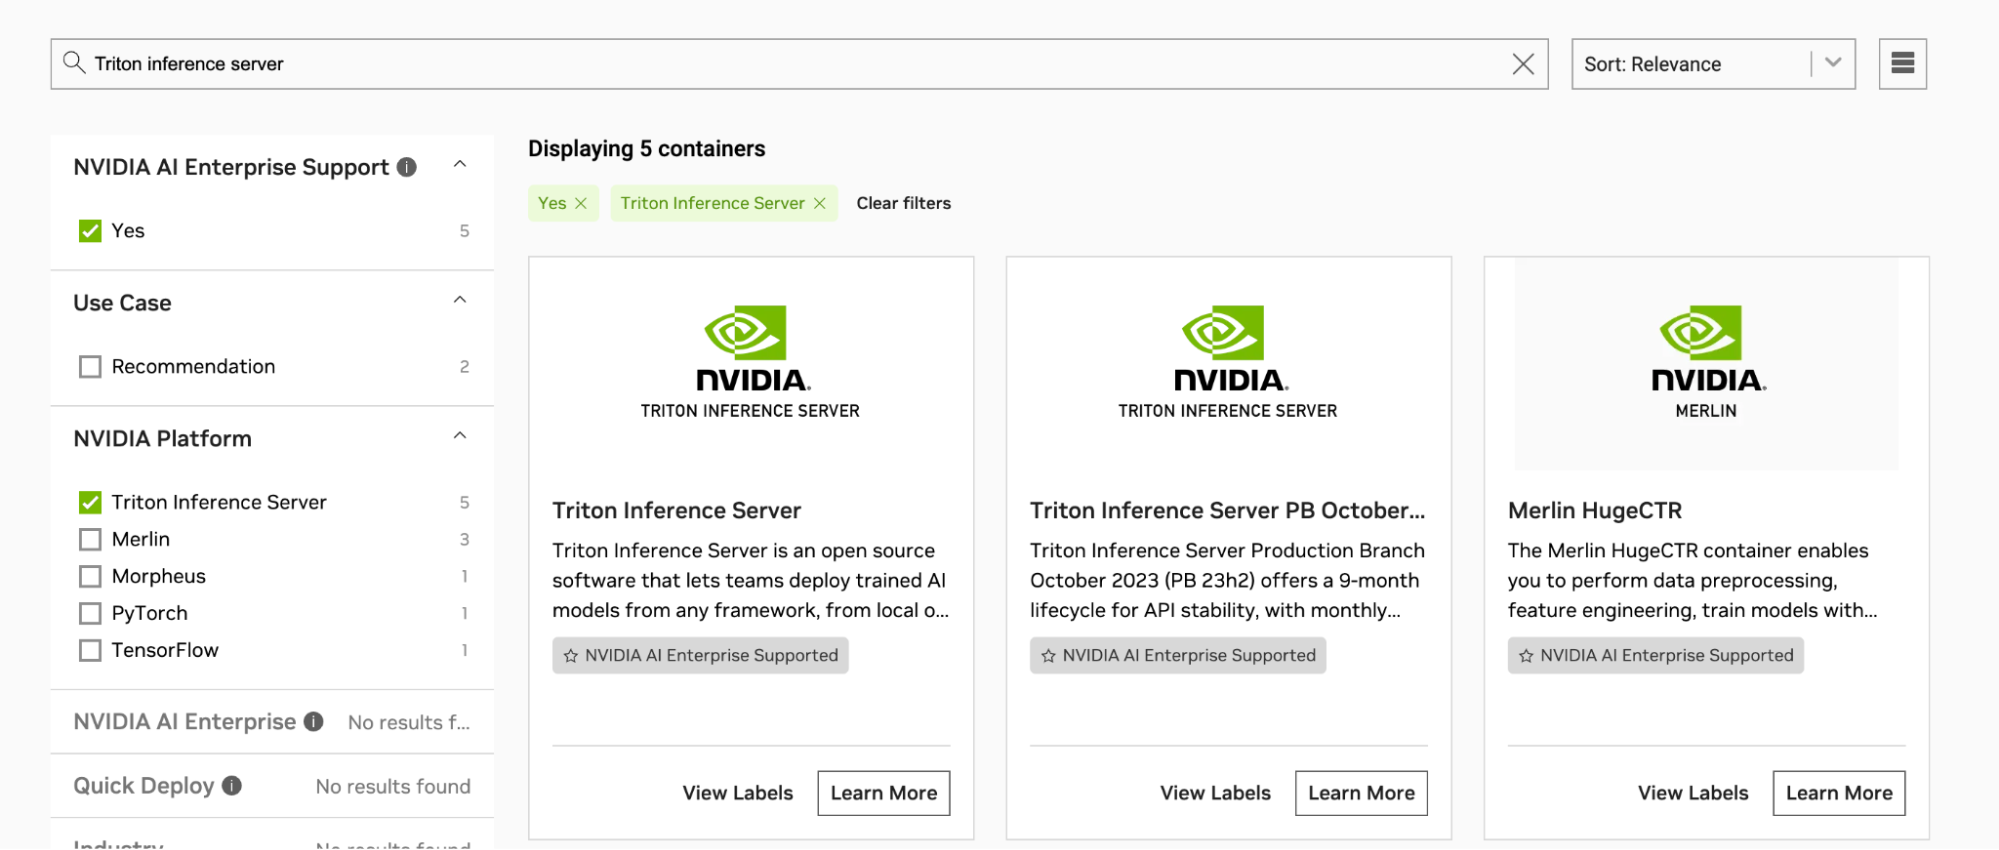 Image showing the search results for NVIDIA Triton Inference Server query.